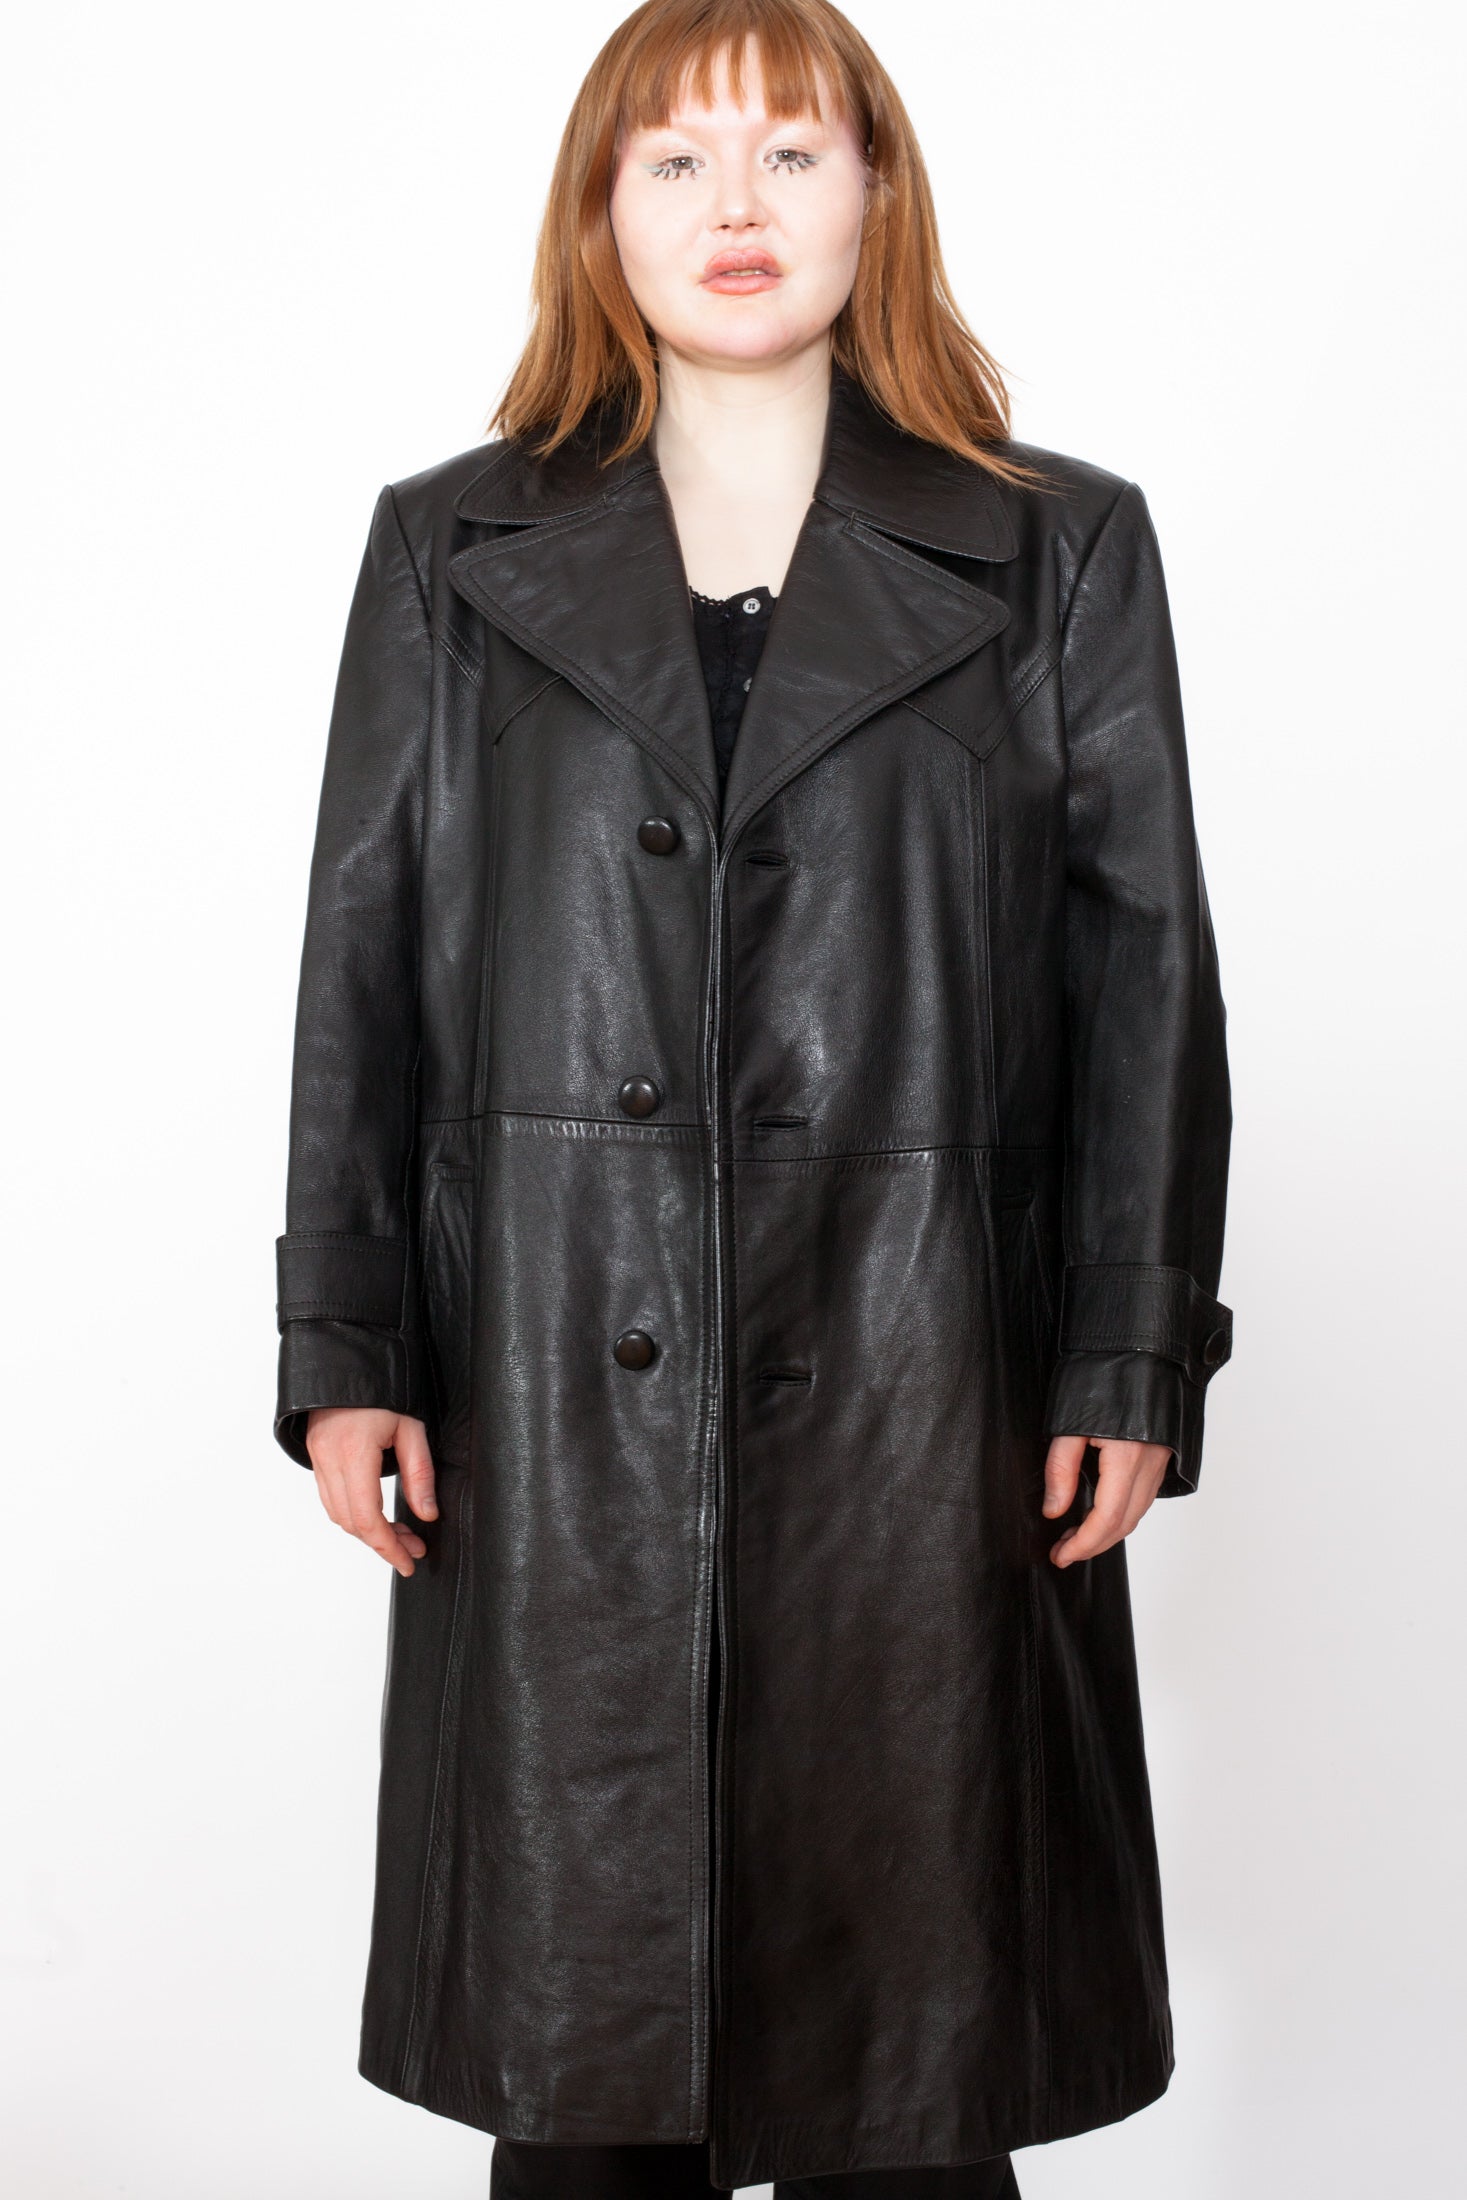 Vintage 80s Leather Trench Coat – Not Too Sweet